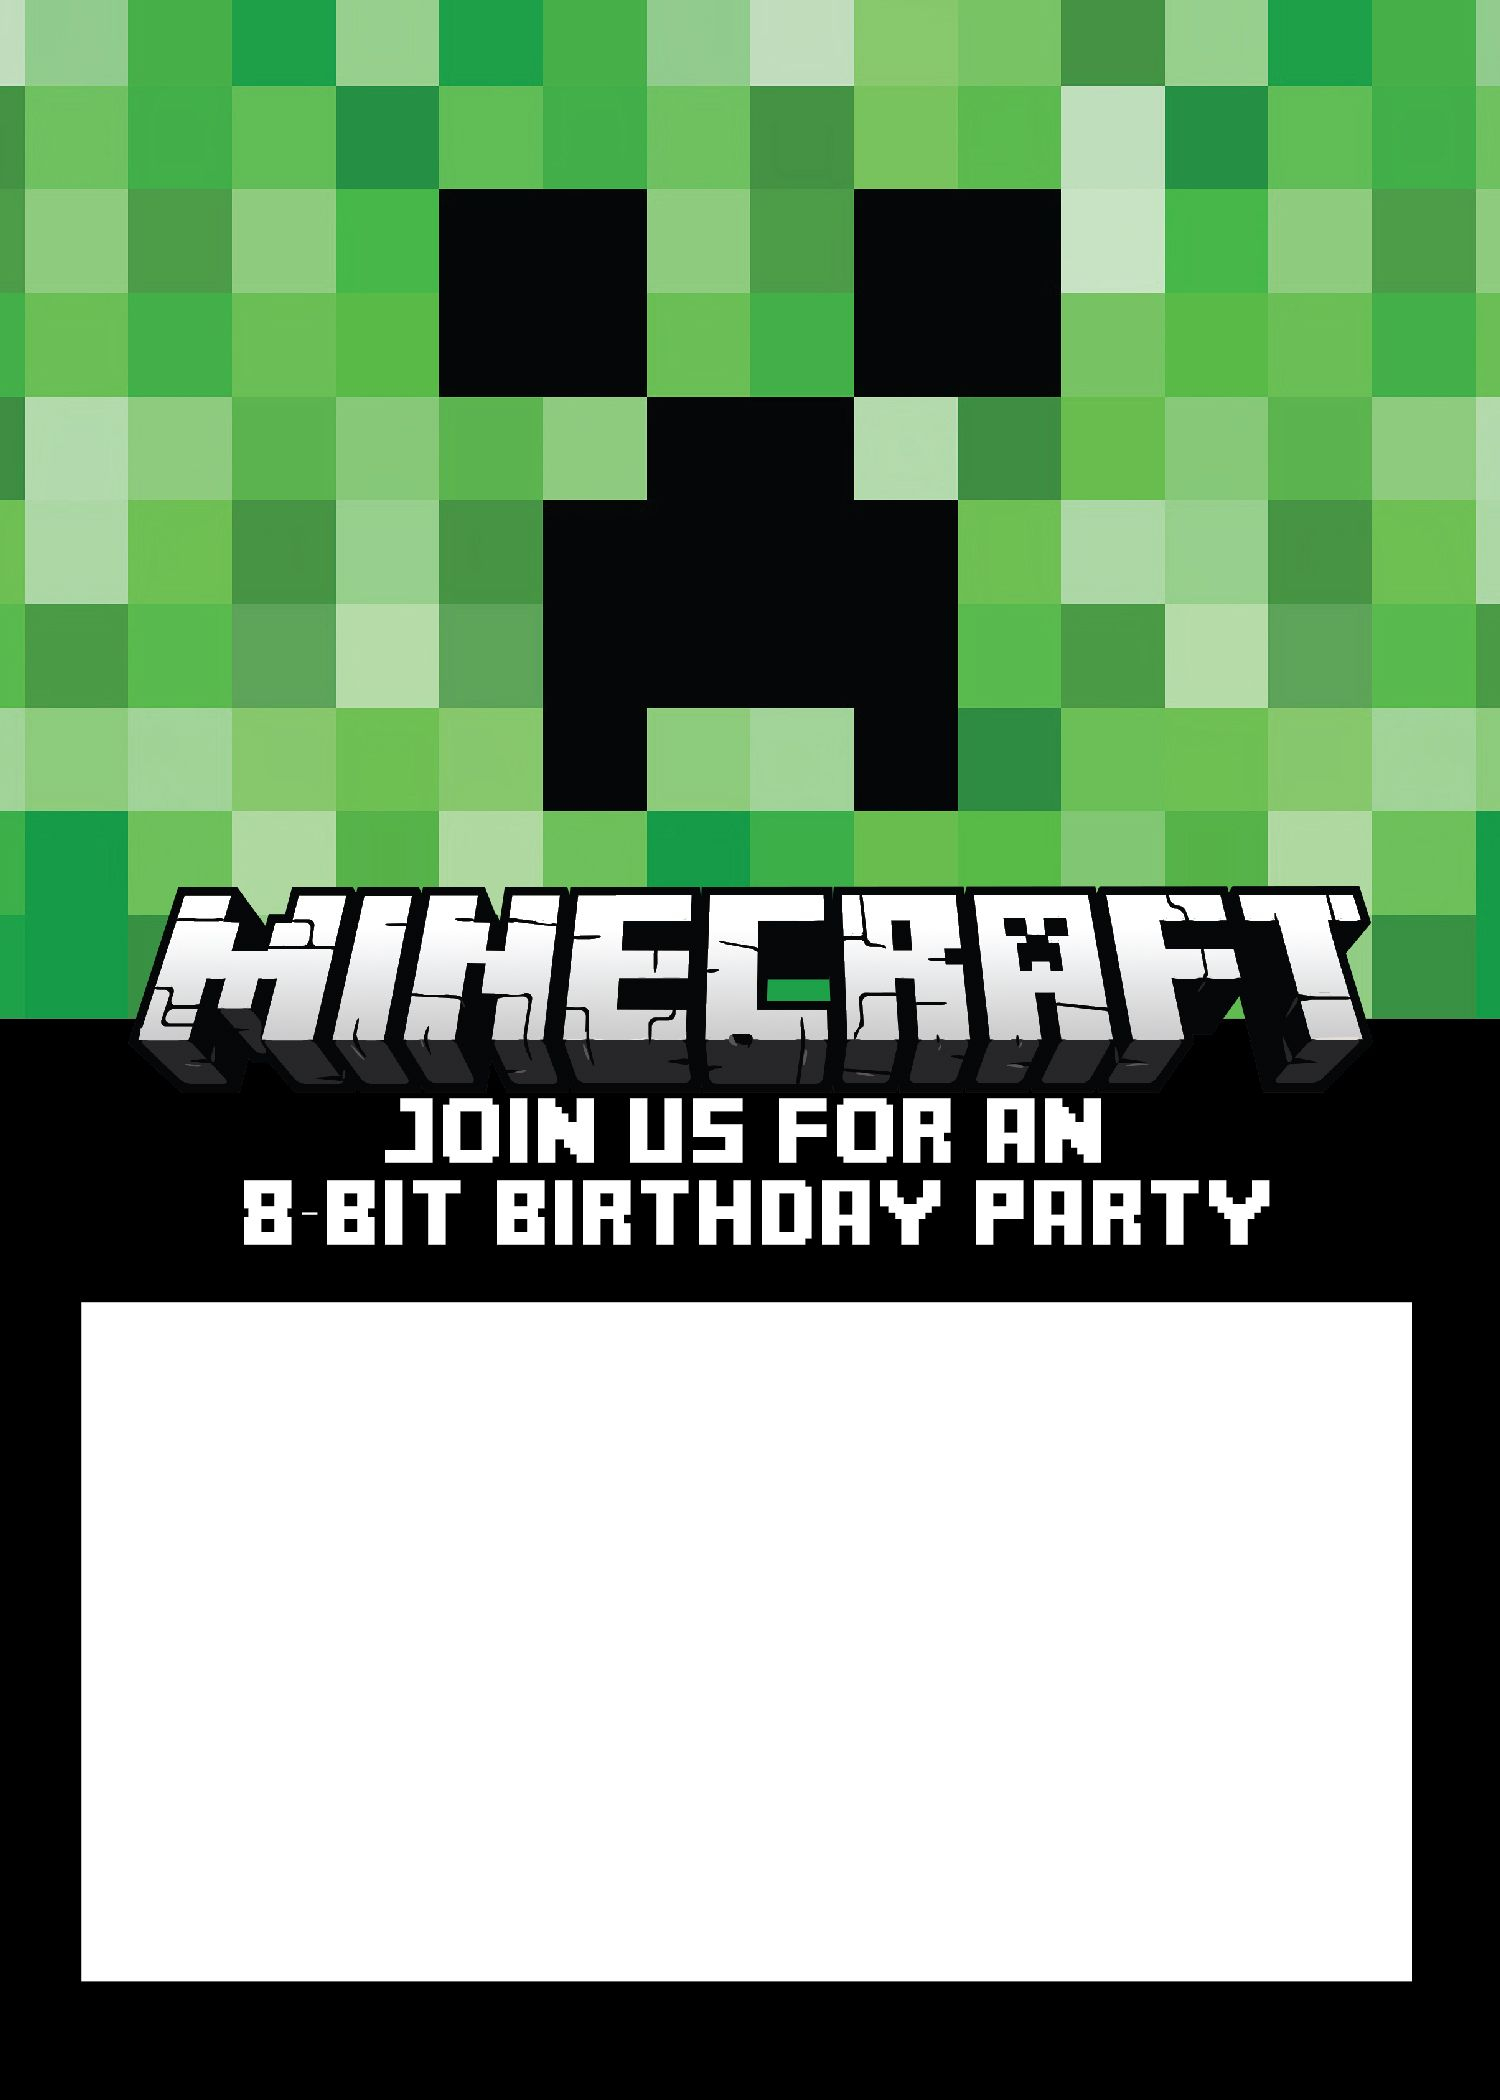 Free Minecraft Invitations For Print Or Evite! | Party Ideas - Free Printable Minecraft Invitations